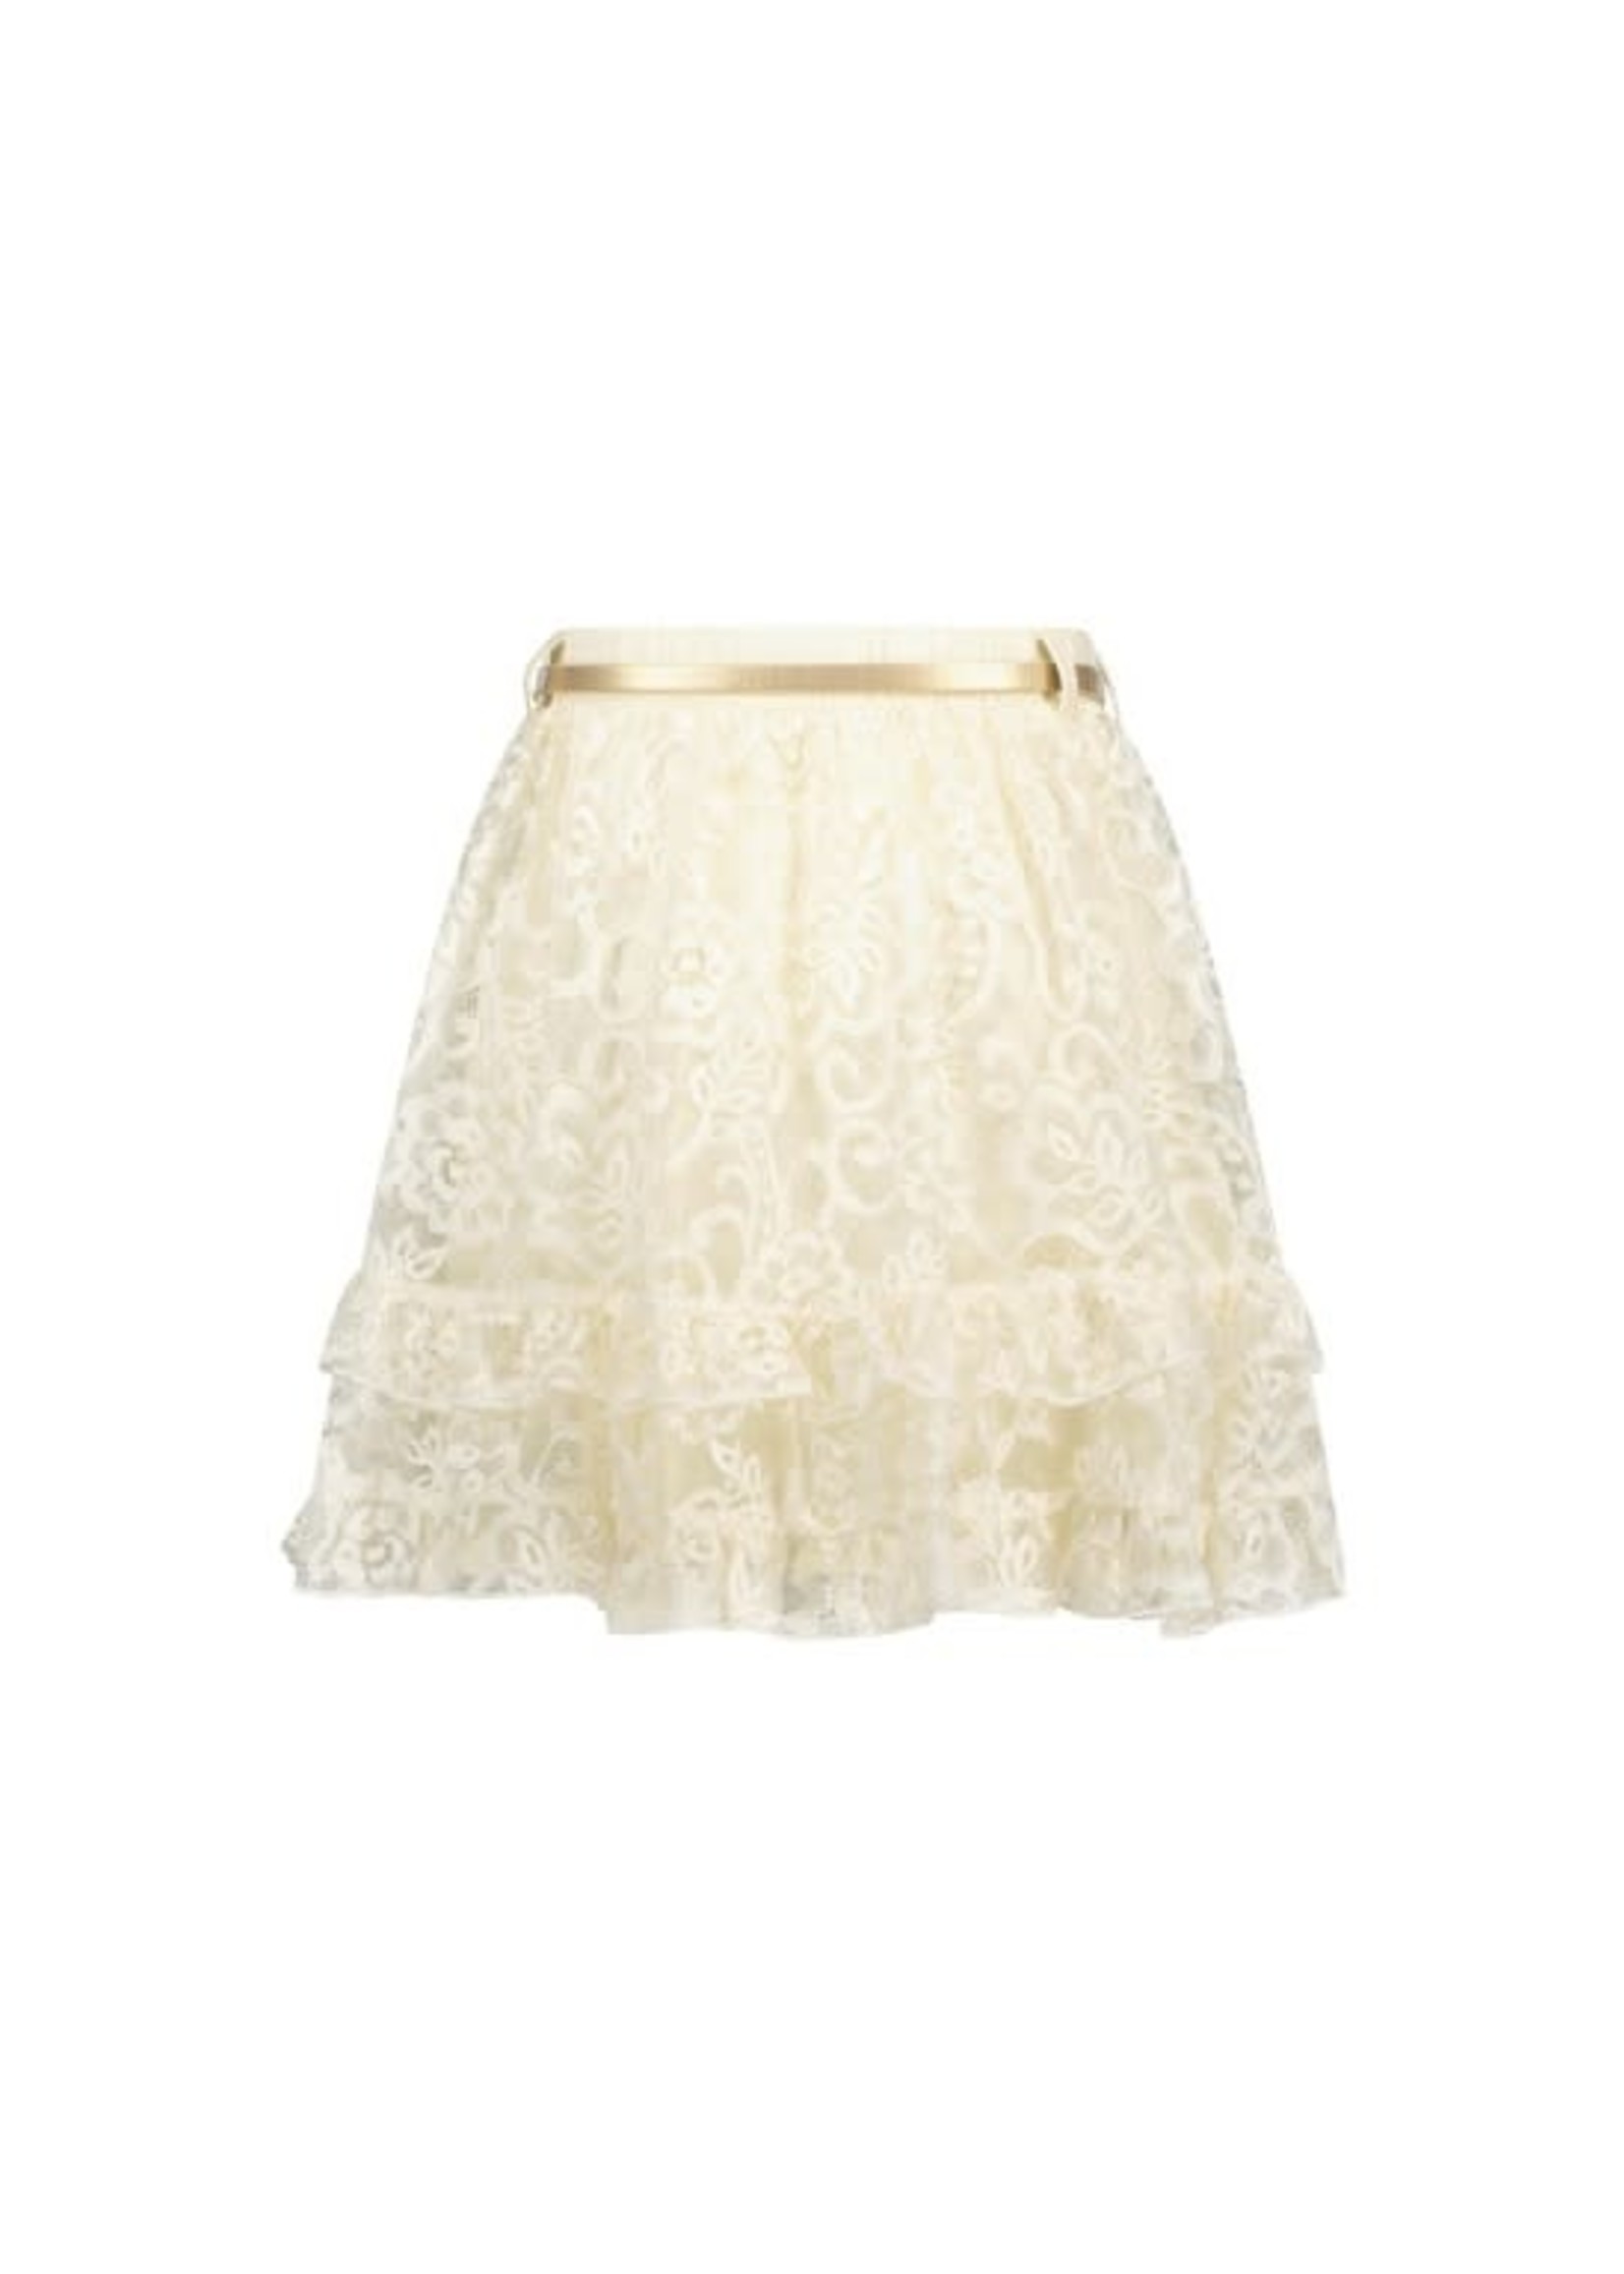 Le Chic Le Chic TEVERLY spring lace skirt C212-5707 Off White